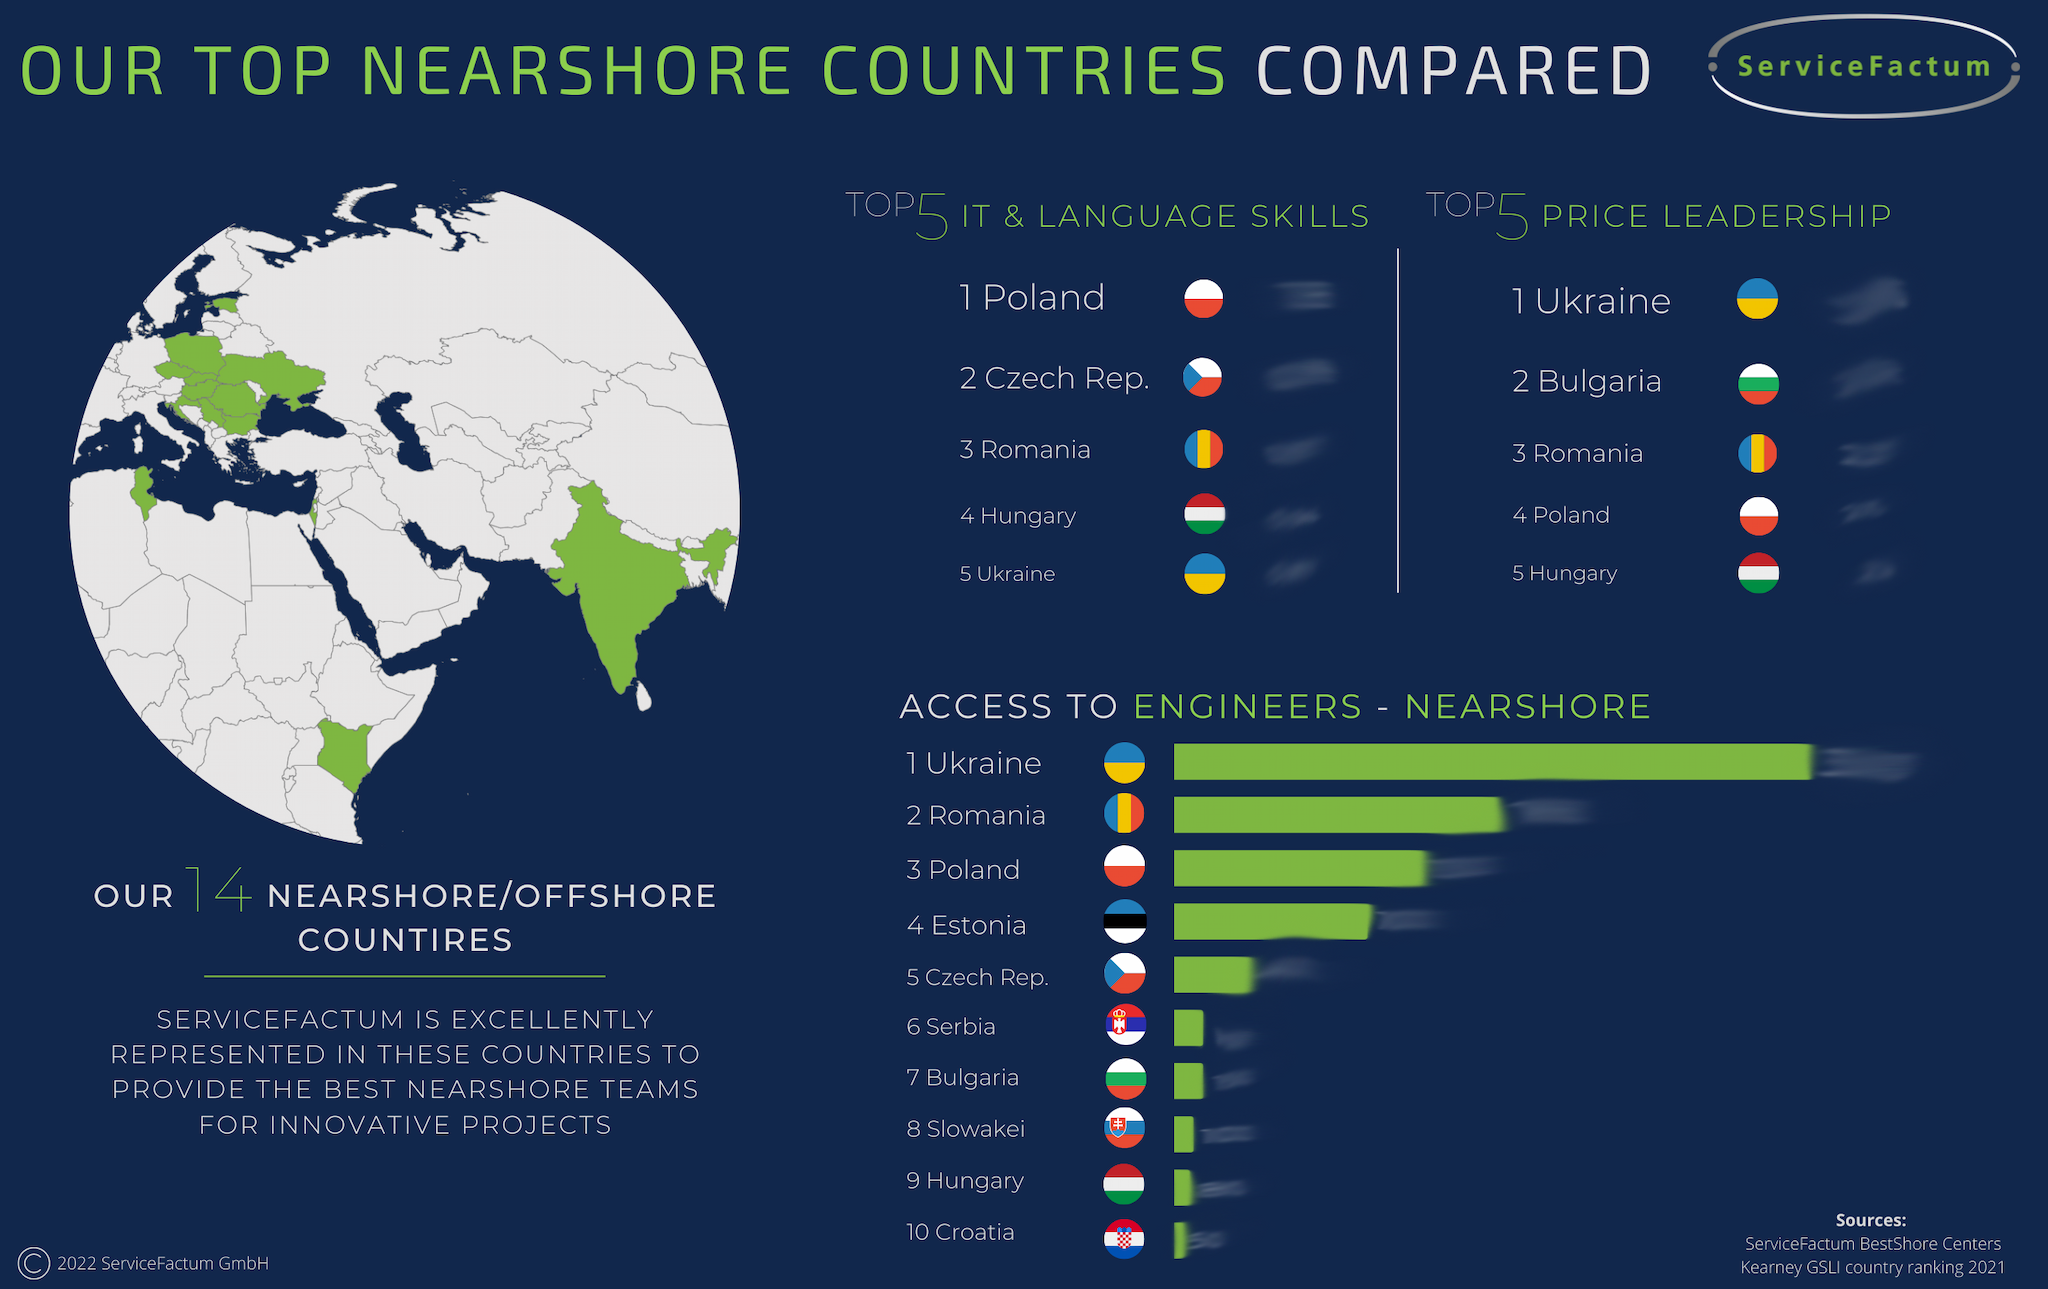 Teaser to our Top Nearshore Countries compared